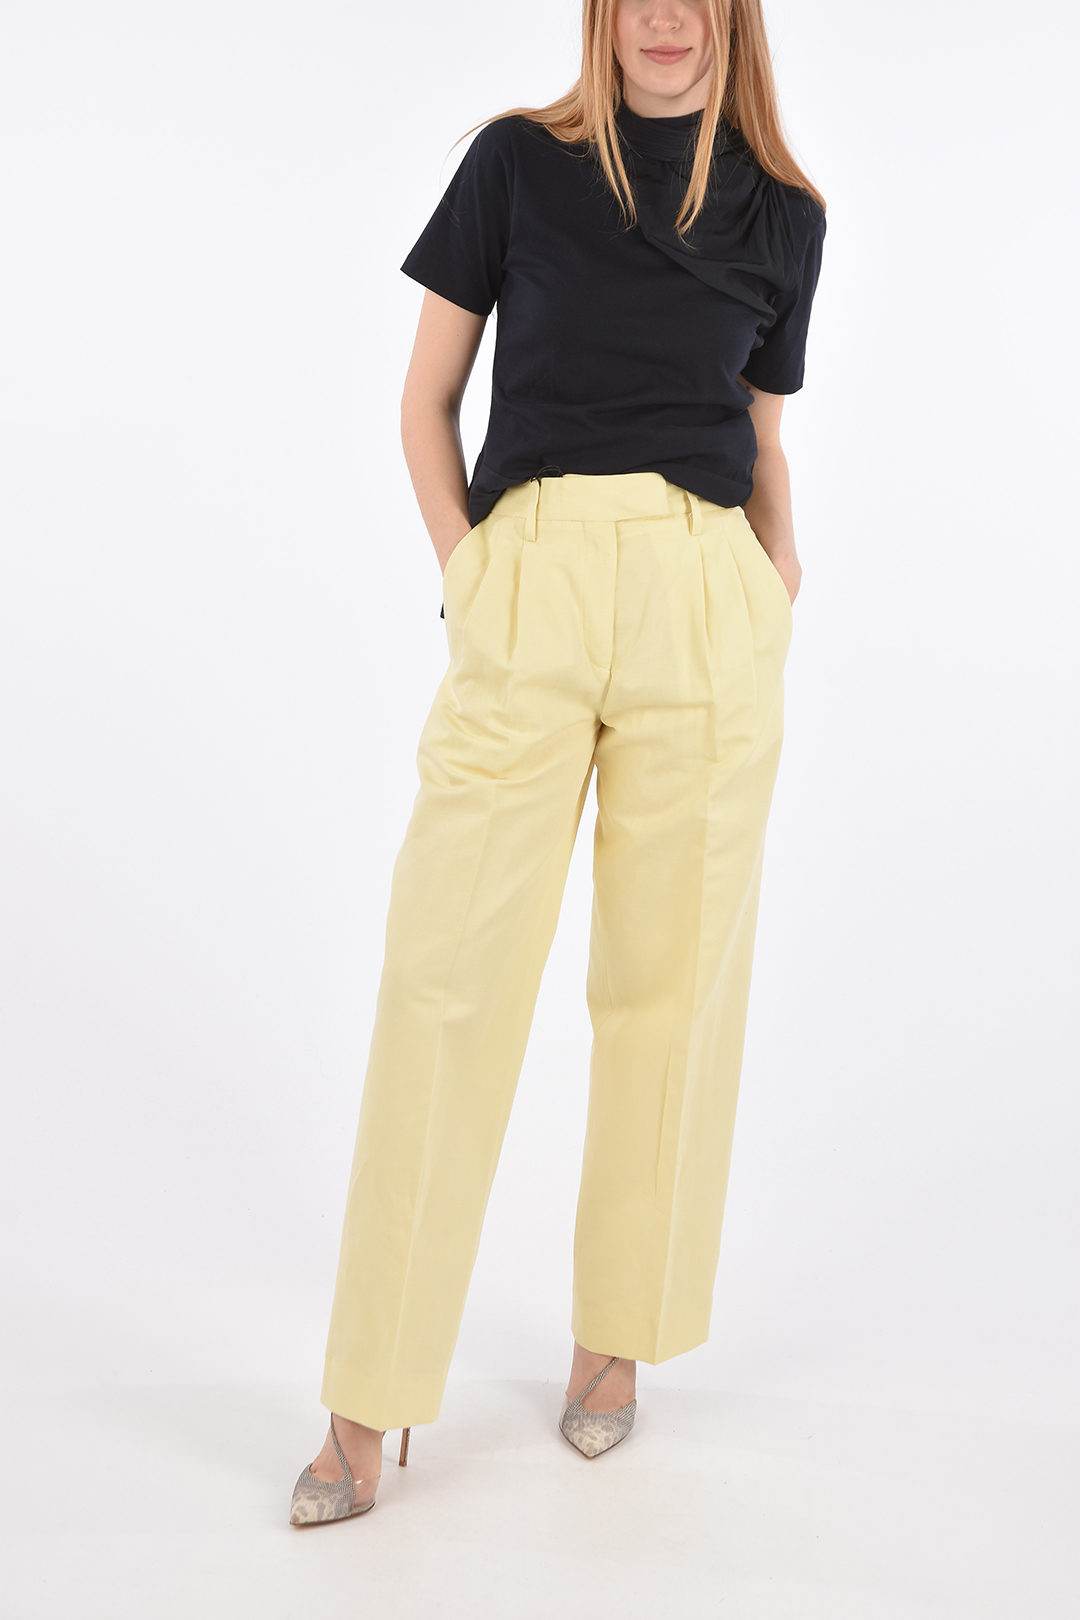 Remain Jetted Pocket CAMINO Double Pleat Pants women - Glamood Outlet